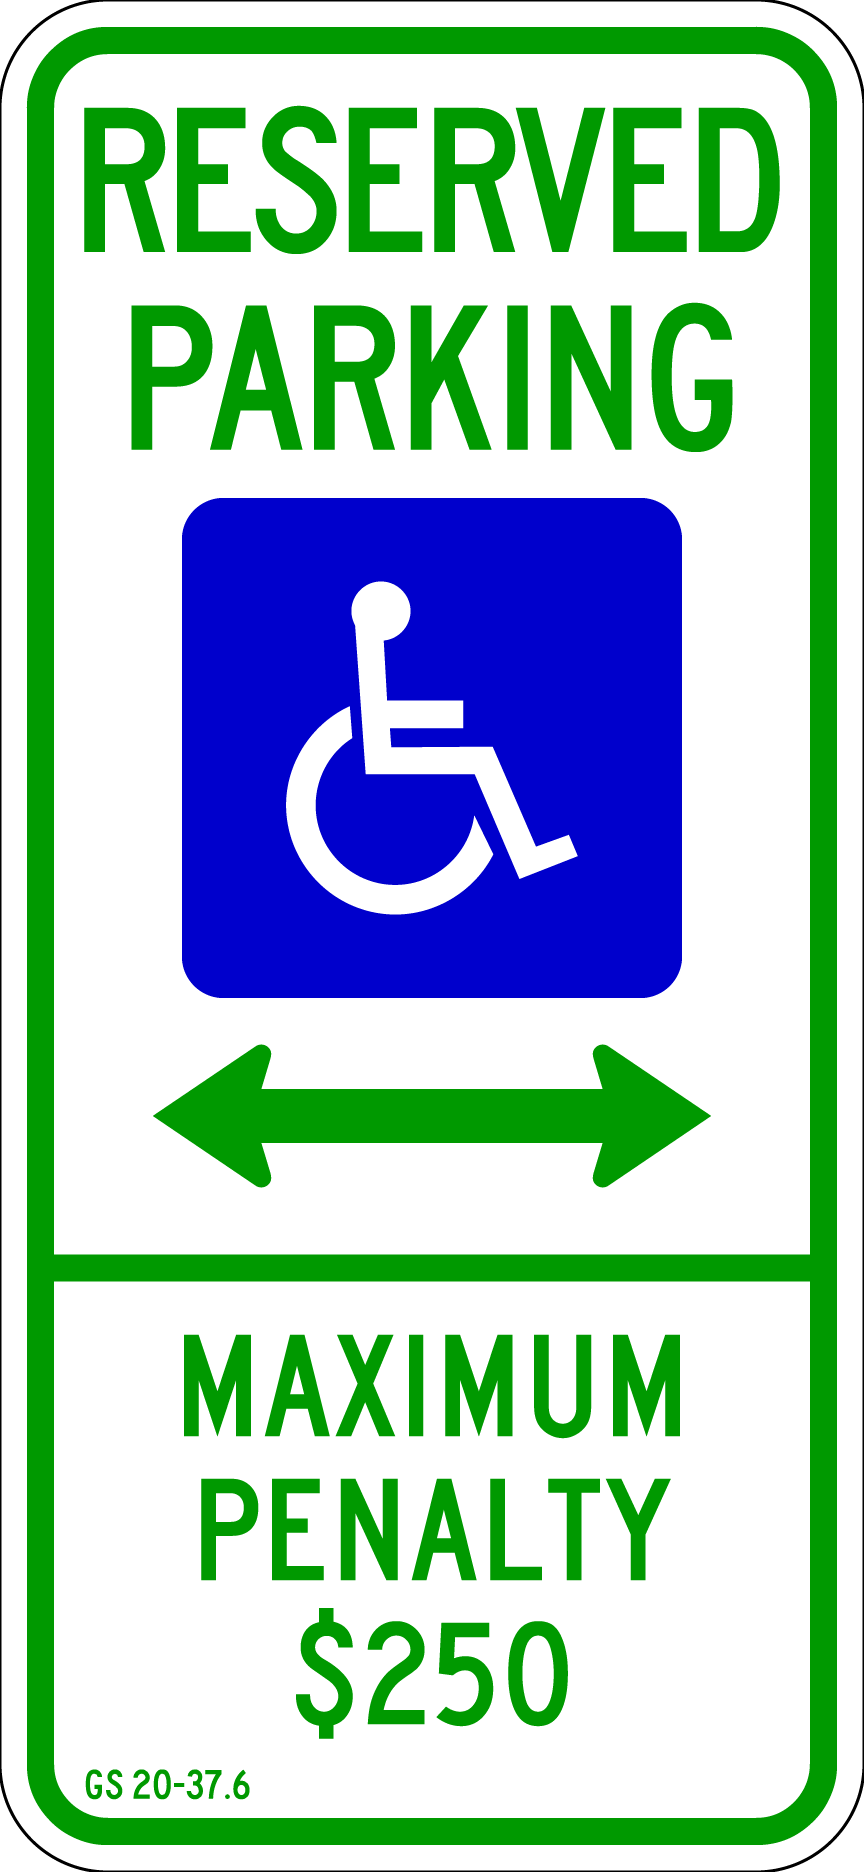 NC Reserved Handicap Max Penalty Double Arrow Metal Sign, Reflective/Non, 12 x 26, Holes, Overlaminate Y/N, Quality Materials, Long Life - PHC-1003